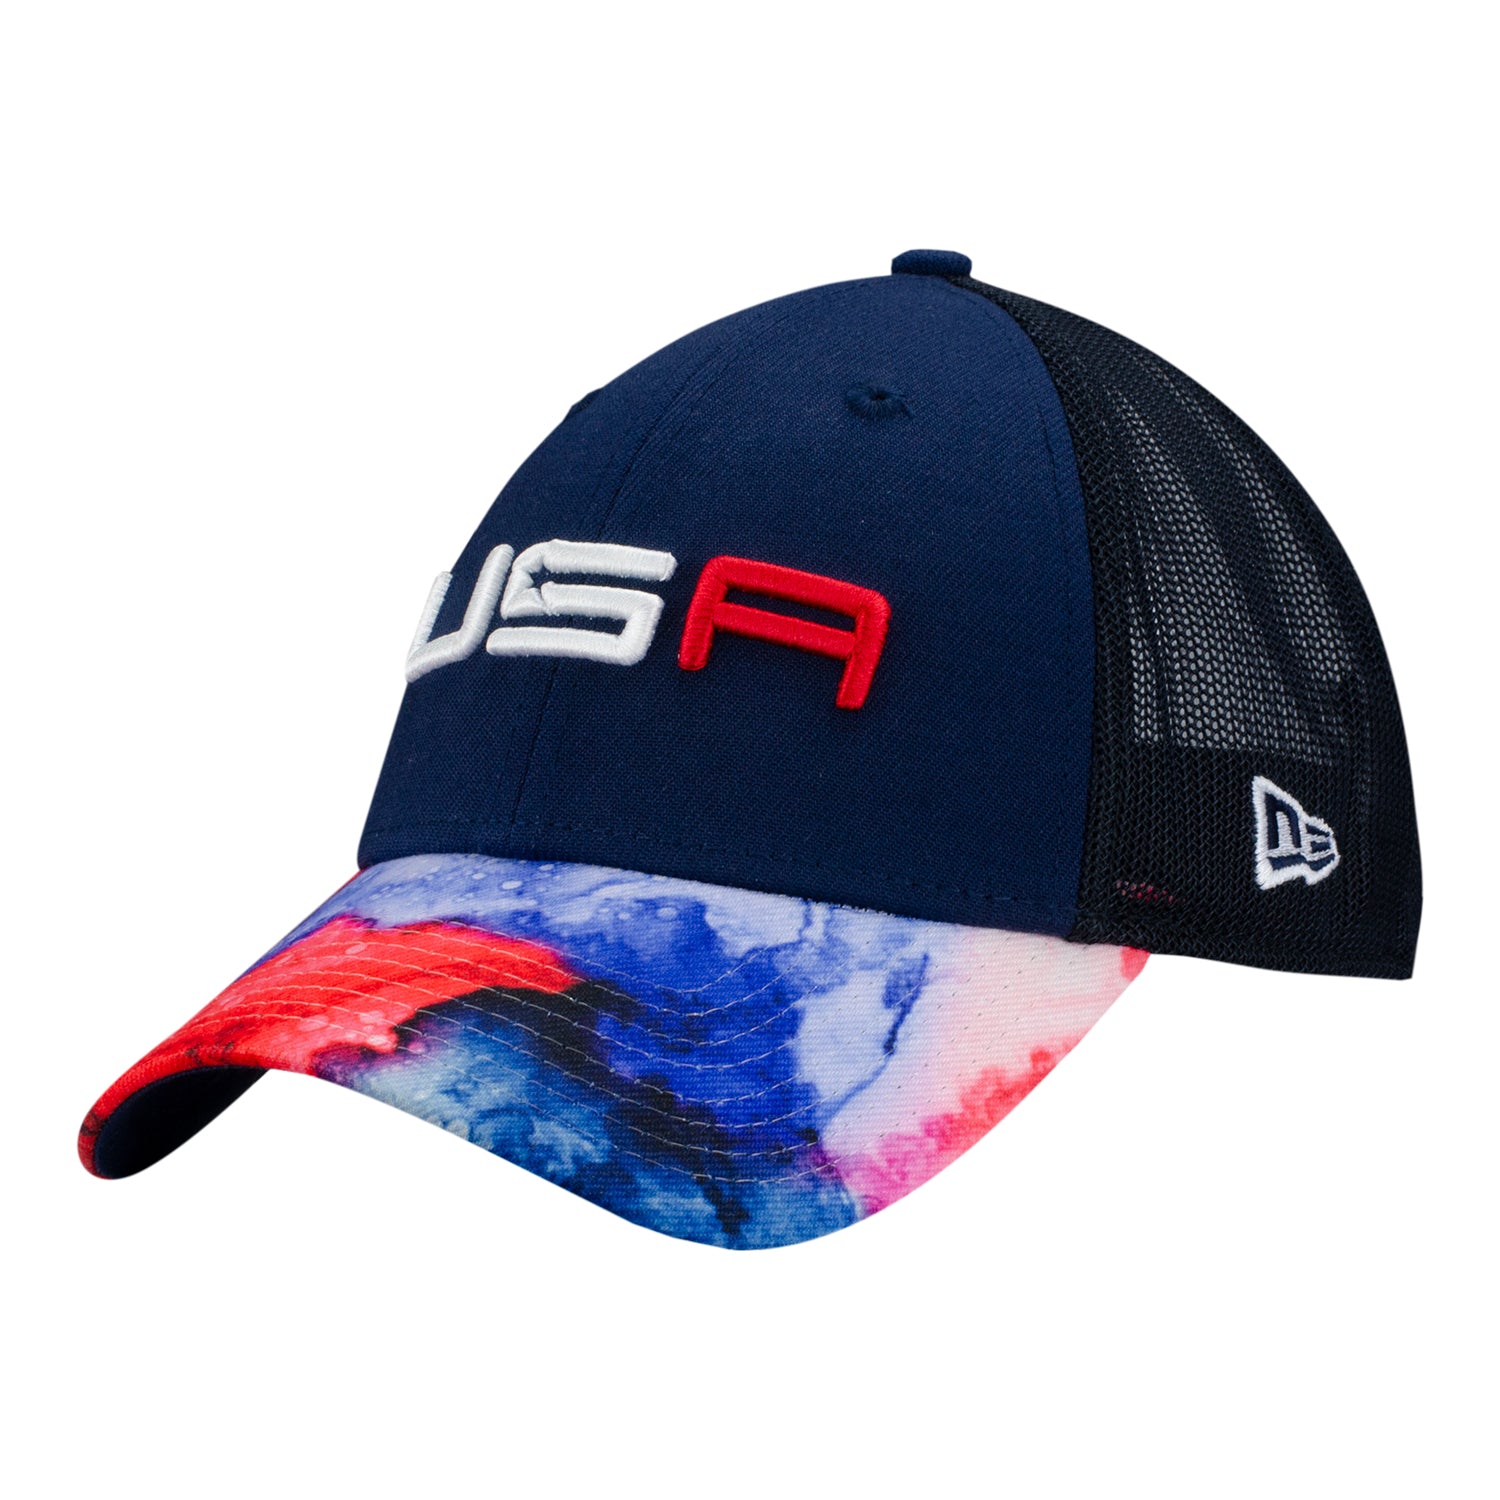 New Era Ryder Cup Hats - US Ryder Cup